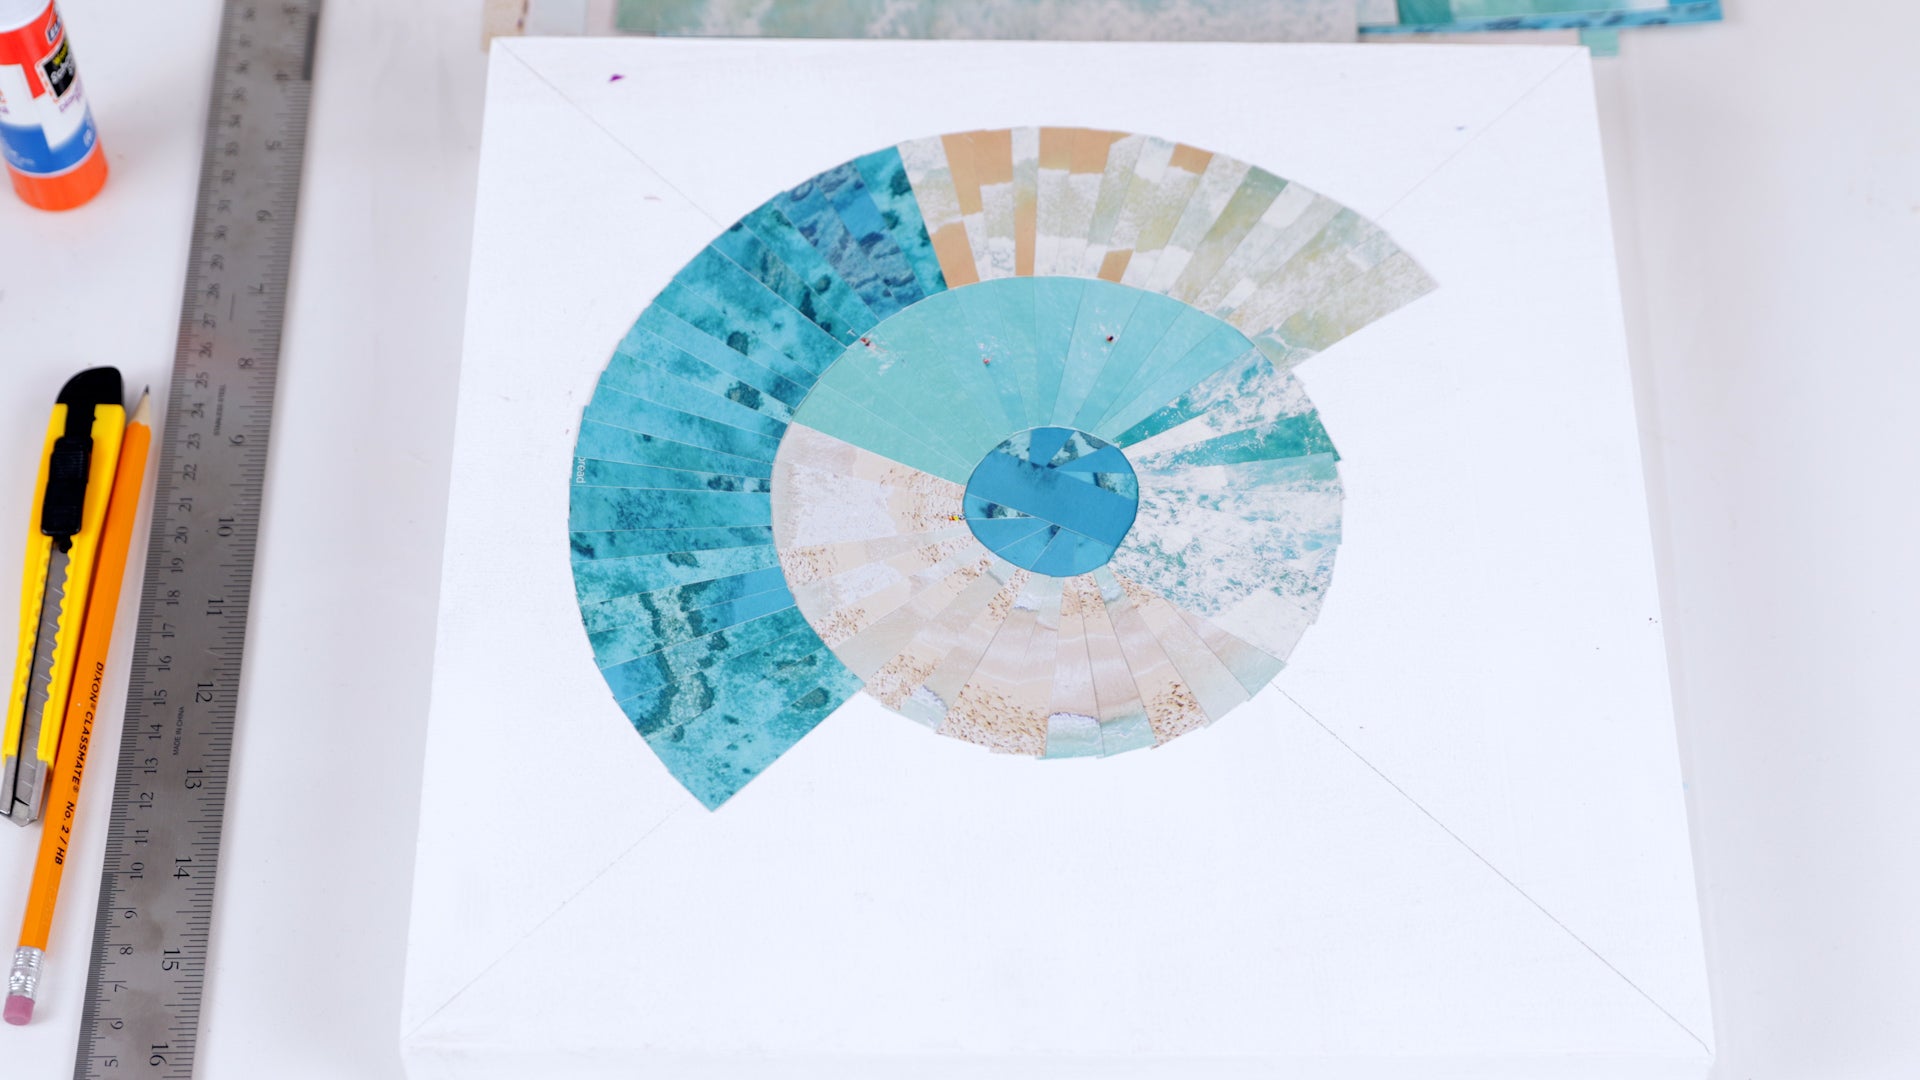 how to resin a paper collage: place lighter colors next to dark to balance out the collage